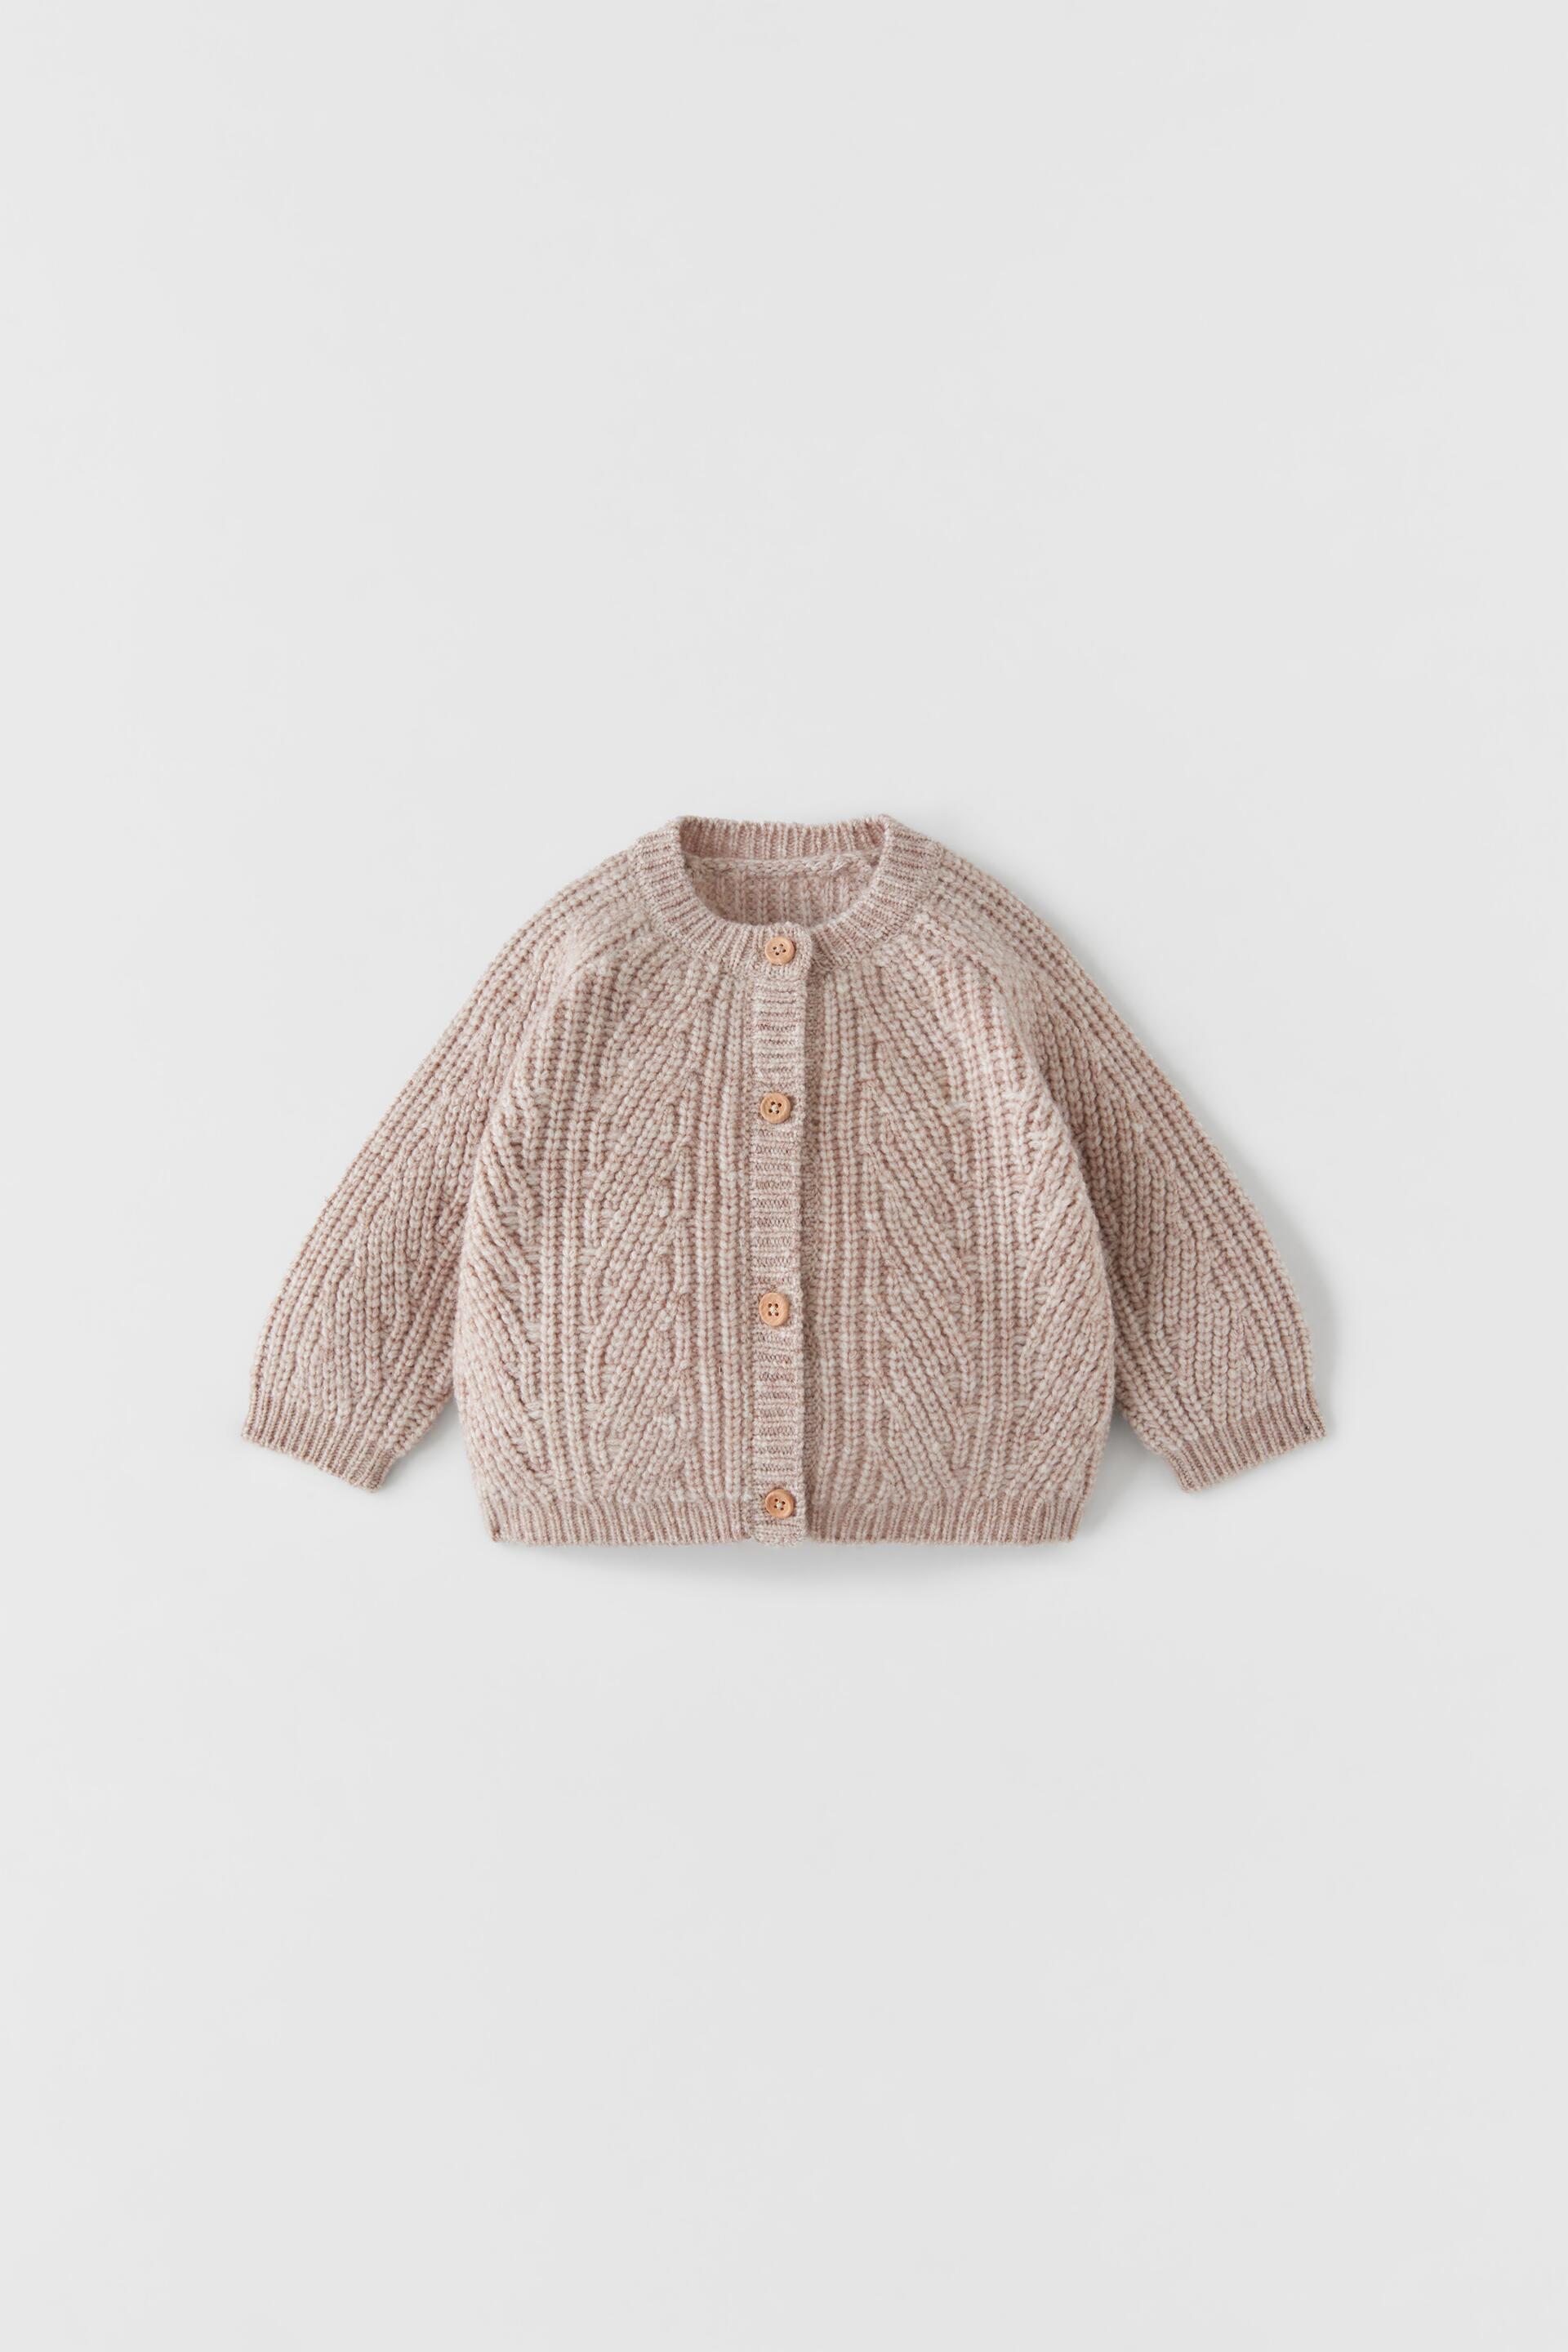 ZARA Thick Gauge Cable-Knit Cardigan